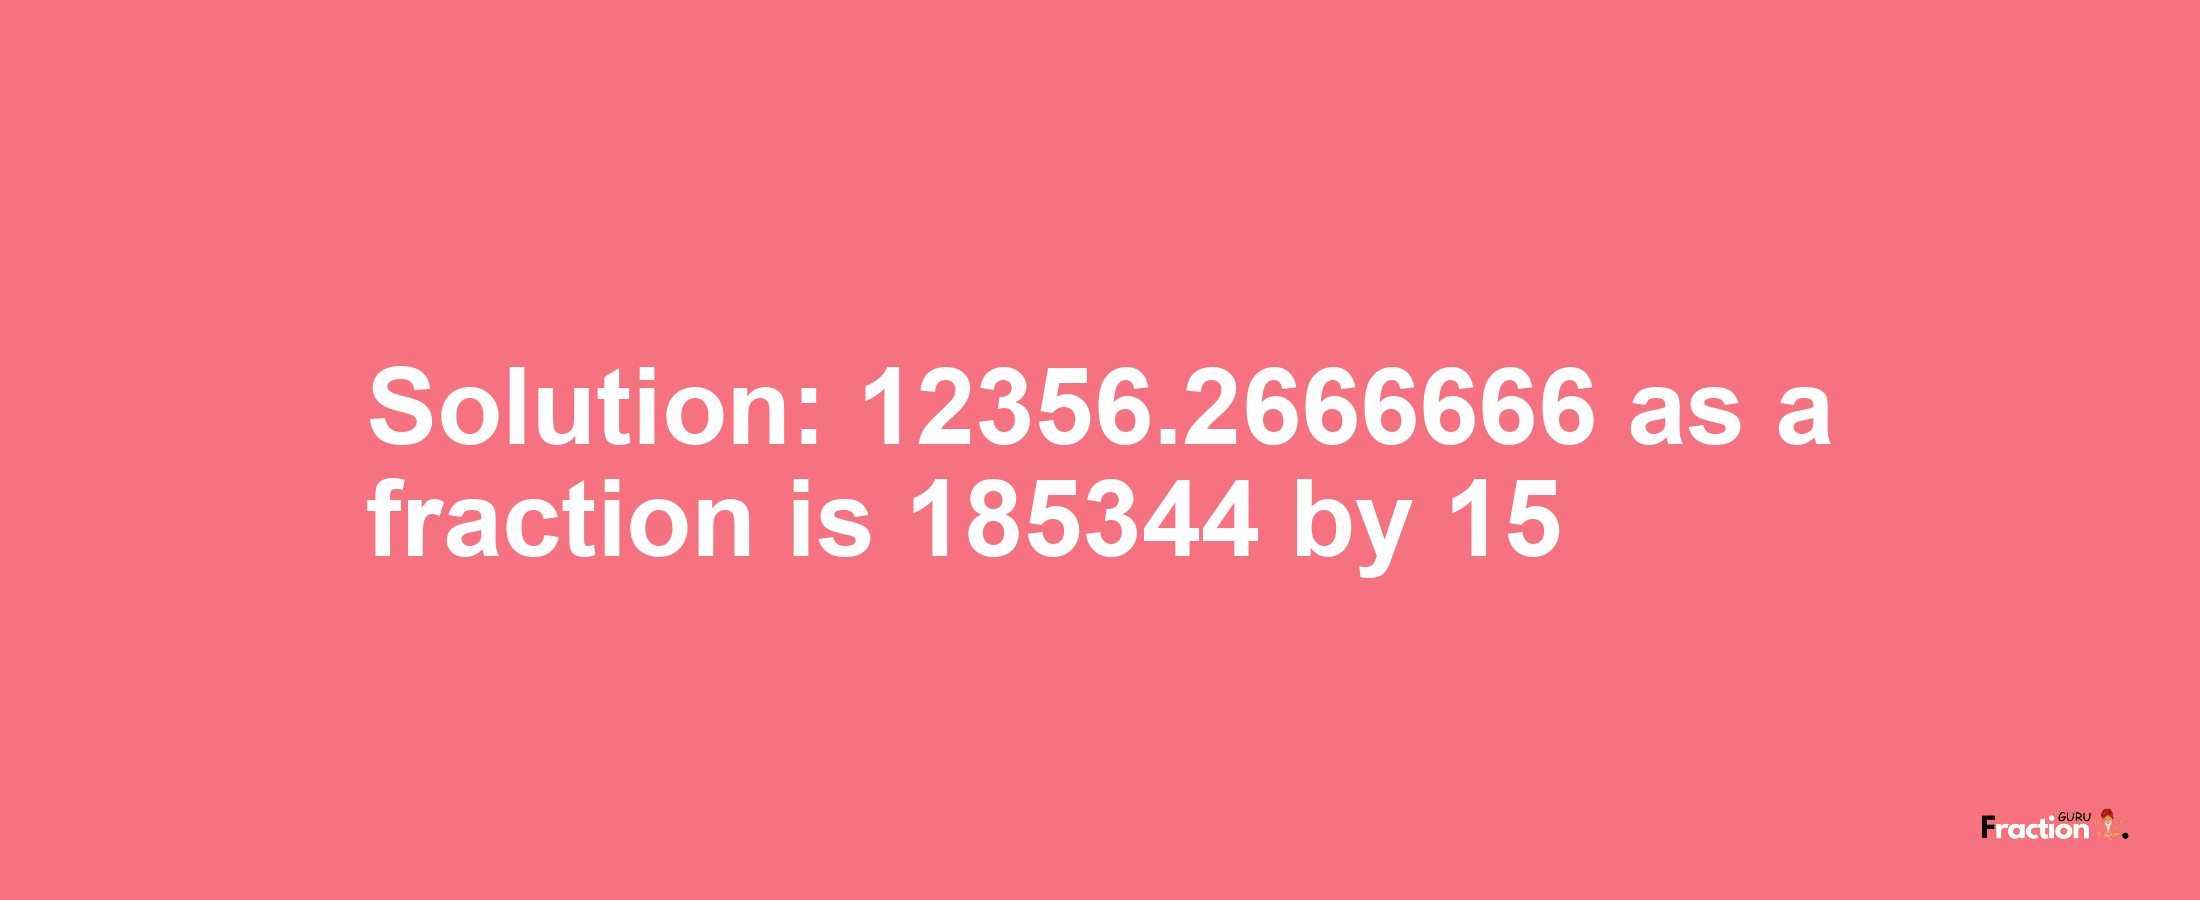 Solution:12356.2666666 as a fraction is 185344/15